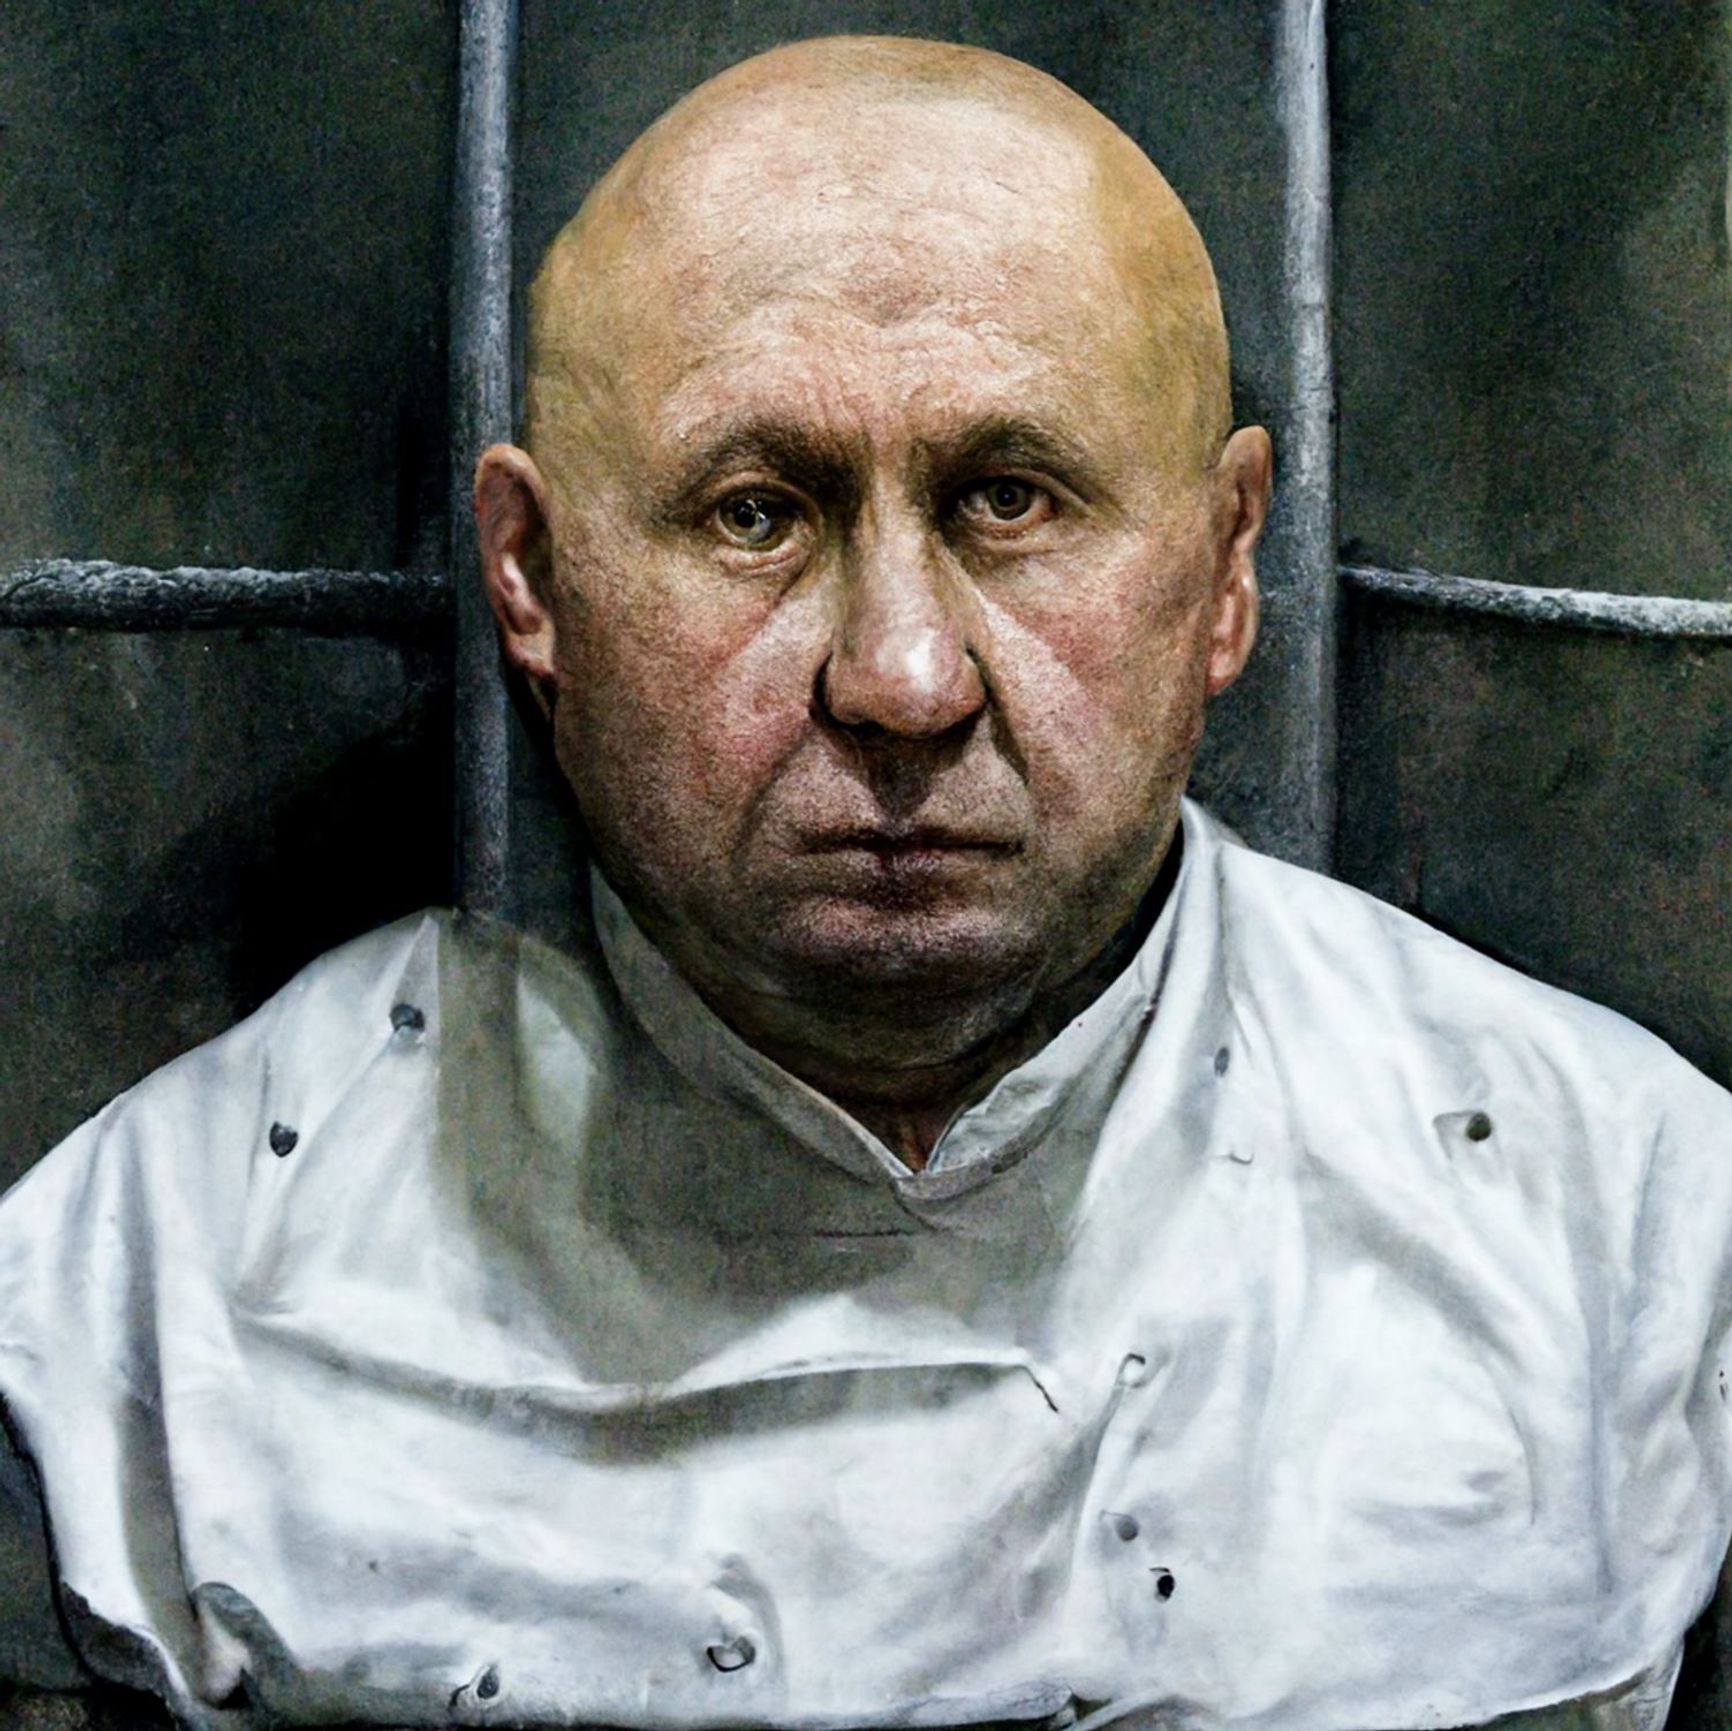 Neural network generated picture: "Putin's chef meets cons"